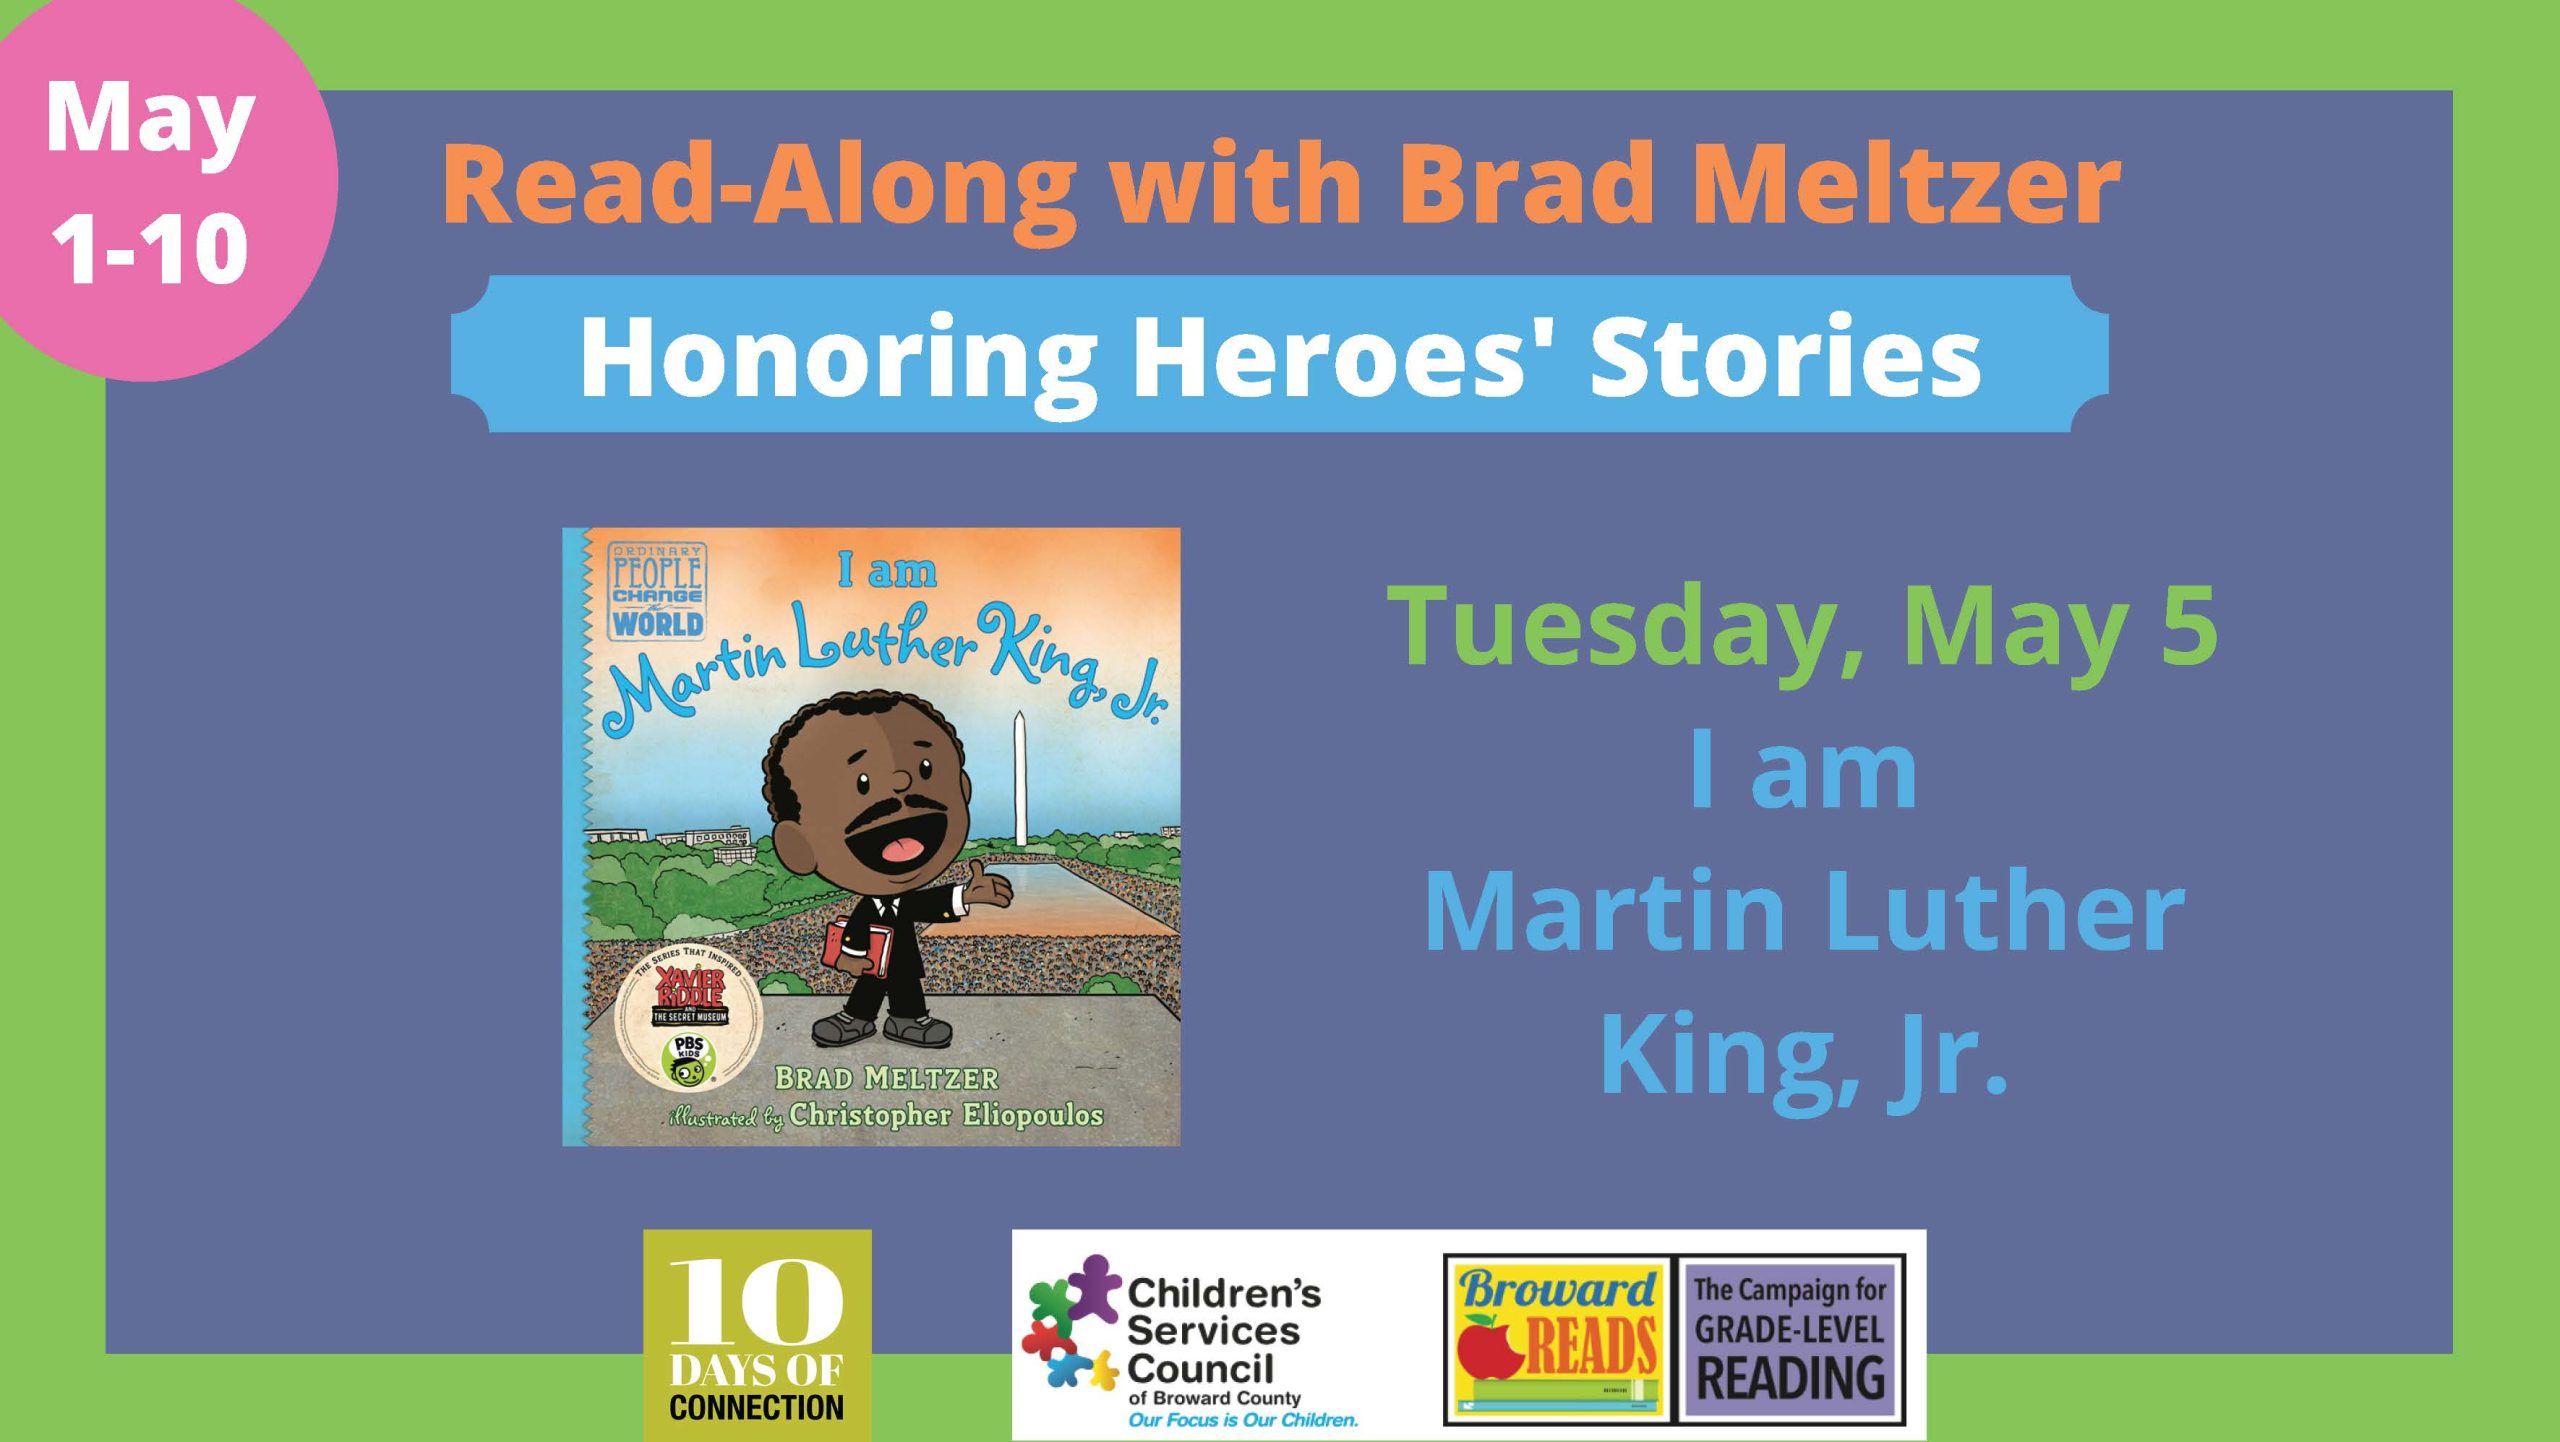 read along with brad meltzer image 3